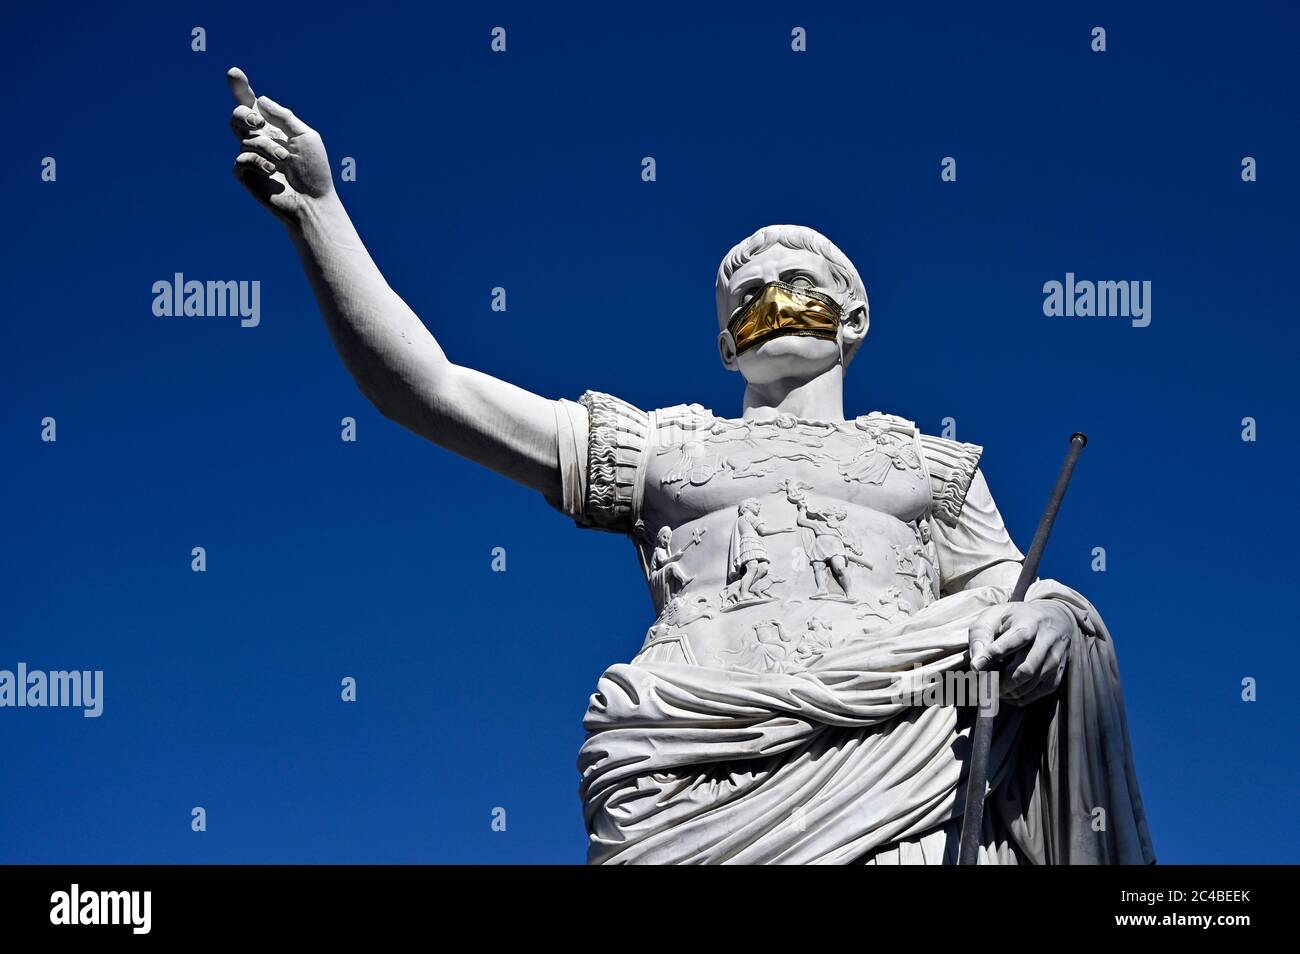 Las Vegas, Nevada, USA. 25th June, 2020. A statue of Julius Caesar in front of Caesars Palace along the Las Vegas Strip wears a face mask amid the spread of the coronavirus on June 25, 2020 in Las Vegas, Nevada. On Wednesday, Nevada Gov. Steve Sisolak signed a directive requiring people to wear face coverings in public places throughout the state beginning on June 26 in response to a four-week upward trend of new daily COVID-19 cases. The governor also cited an increase in confirmed and suspected COVID-19 hospitalizations since the state entered Phase Two of the state's reopening plan on May Stock Photo